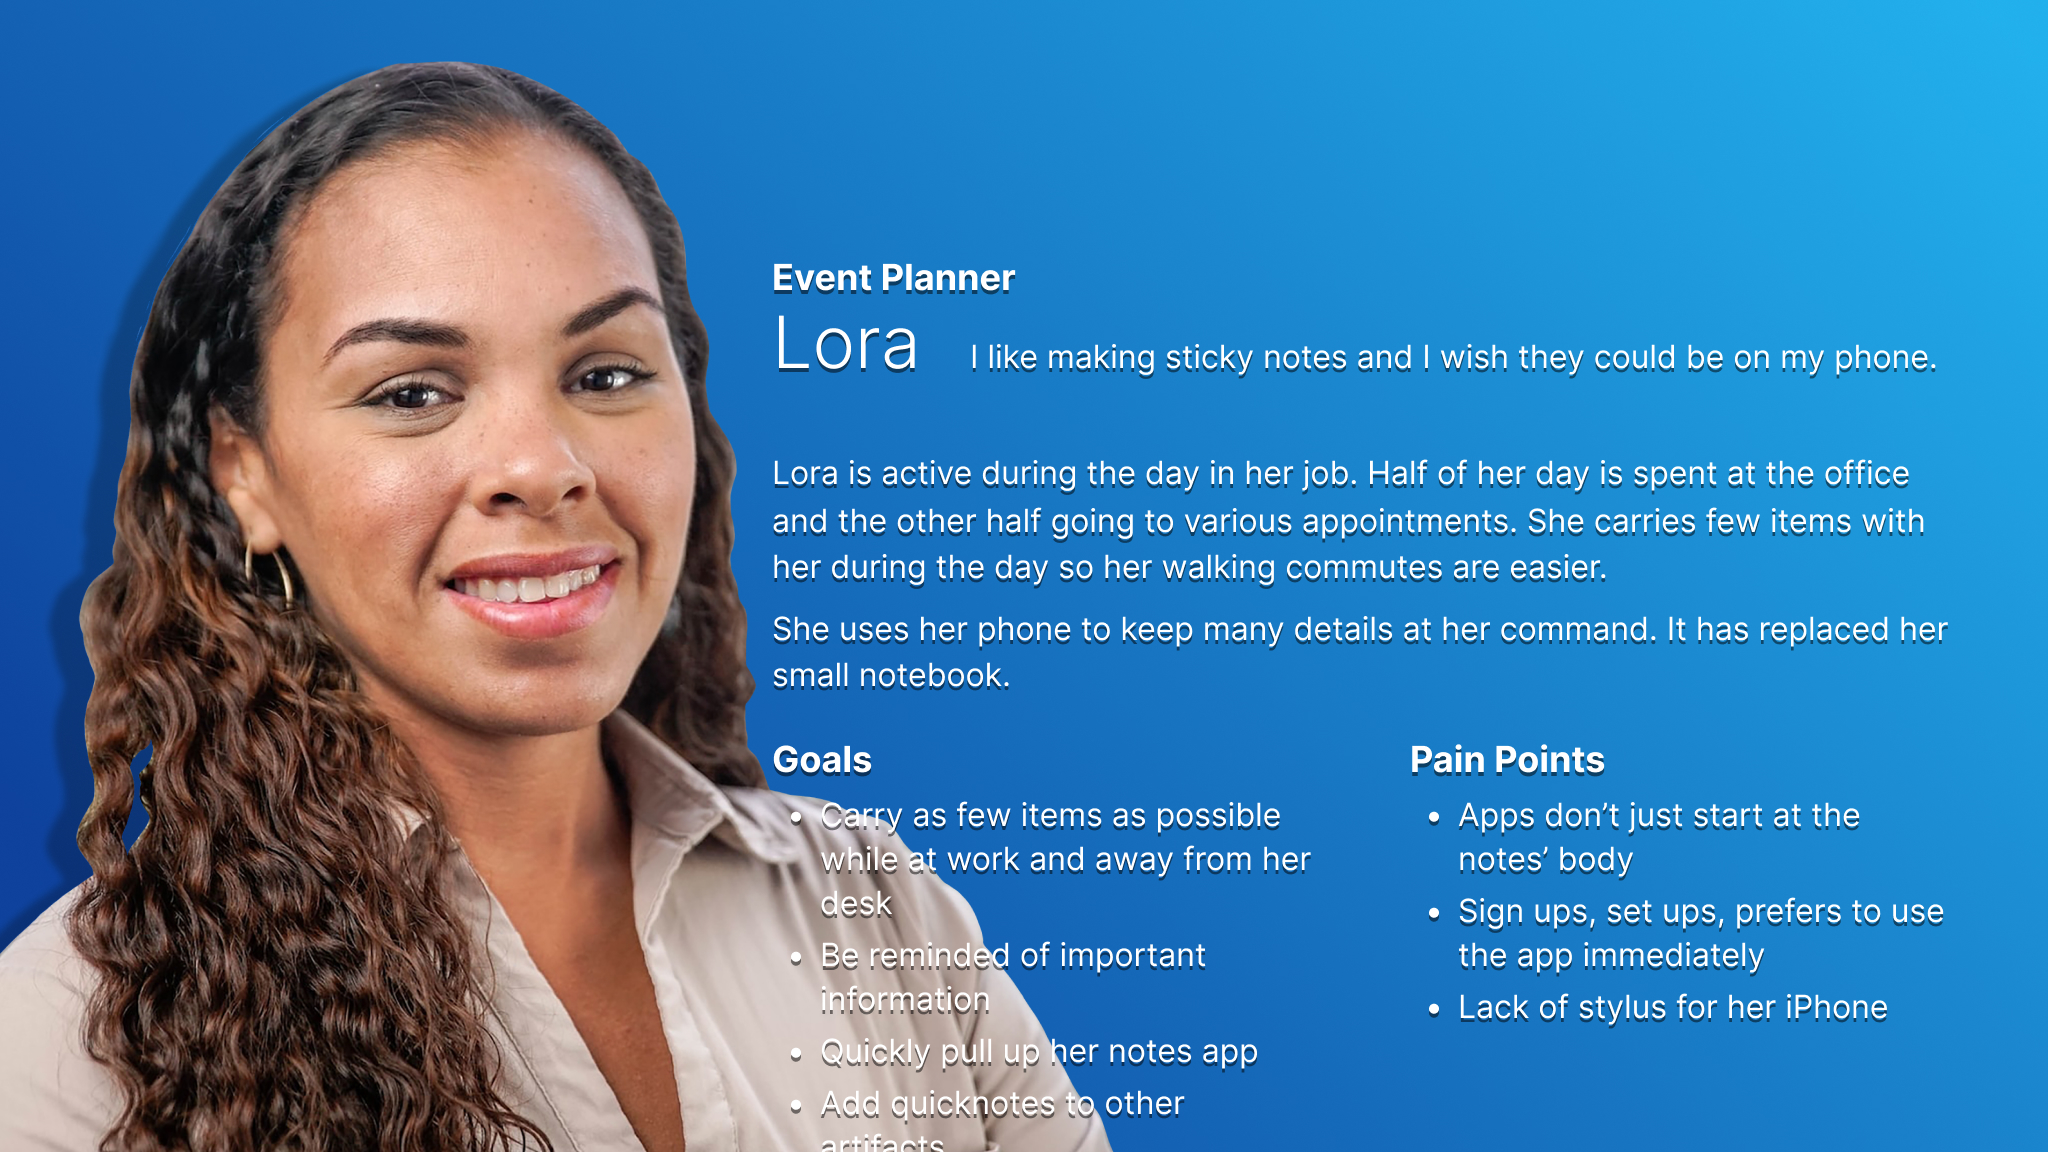 Persona card for Lora who represents users who want to take a few moments longer to create visual notes.